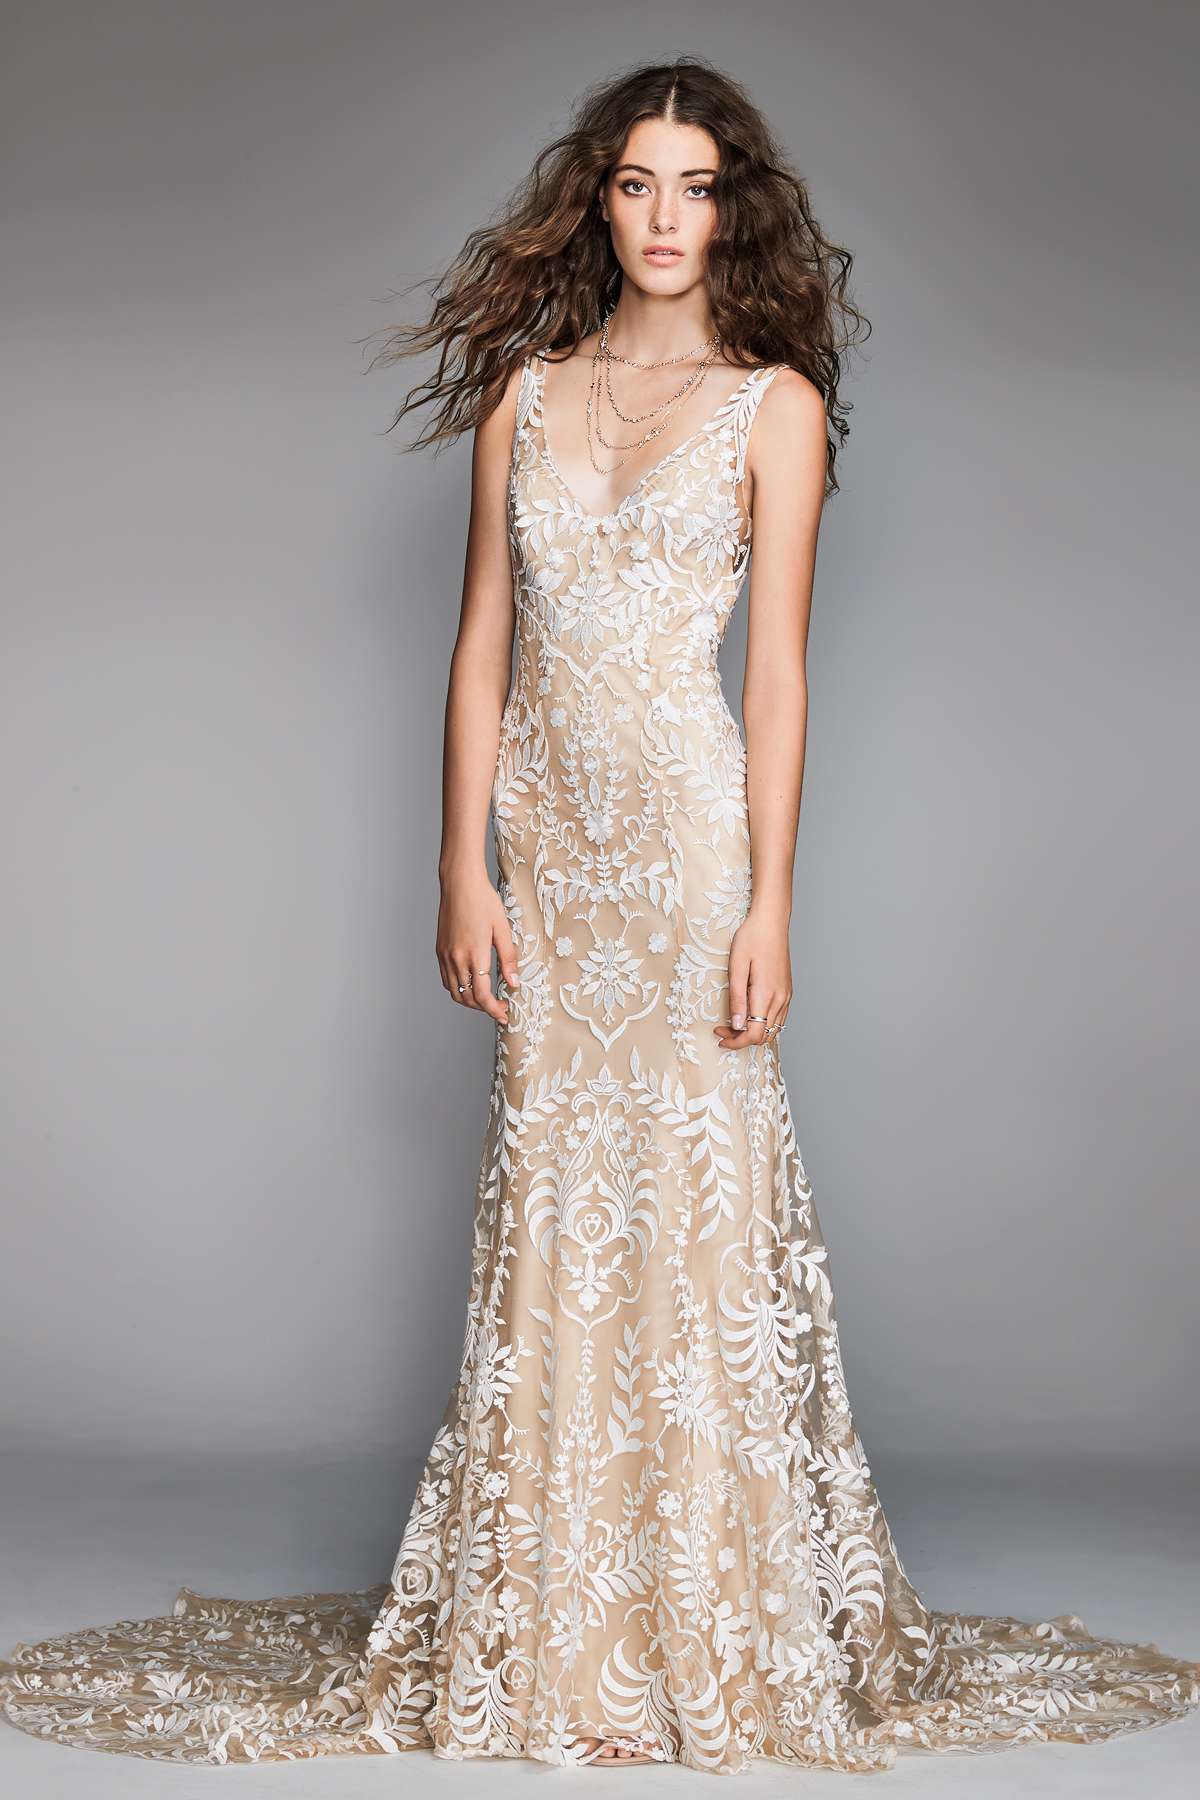 willowby by watters 2018 champagne v-neck floral detail wedding dress